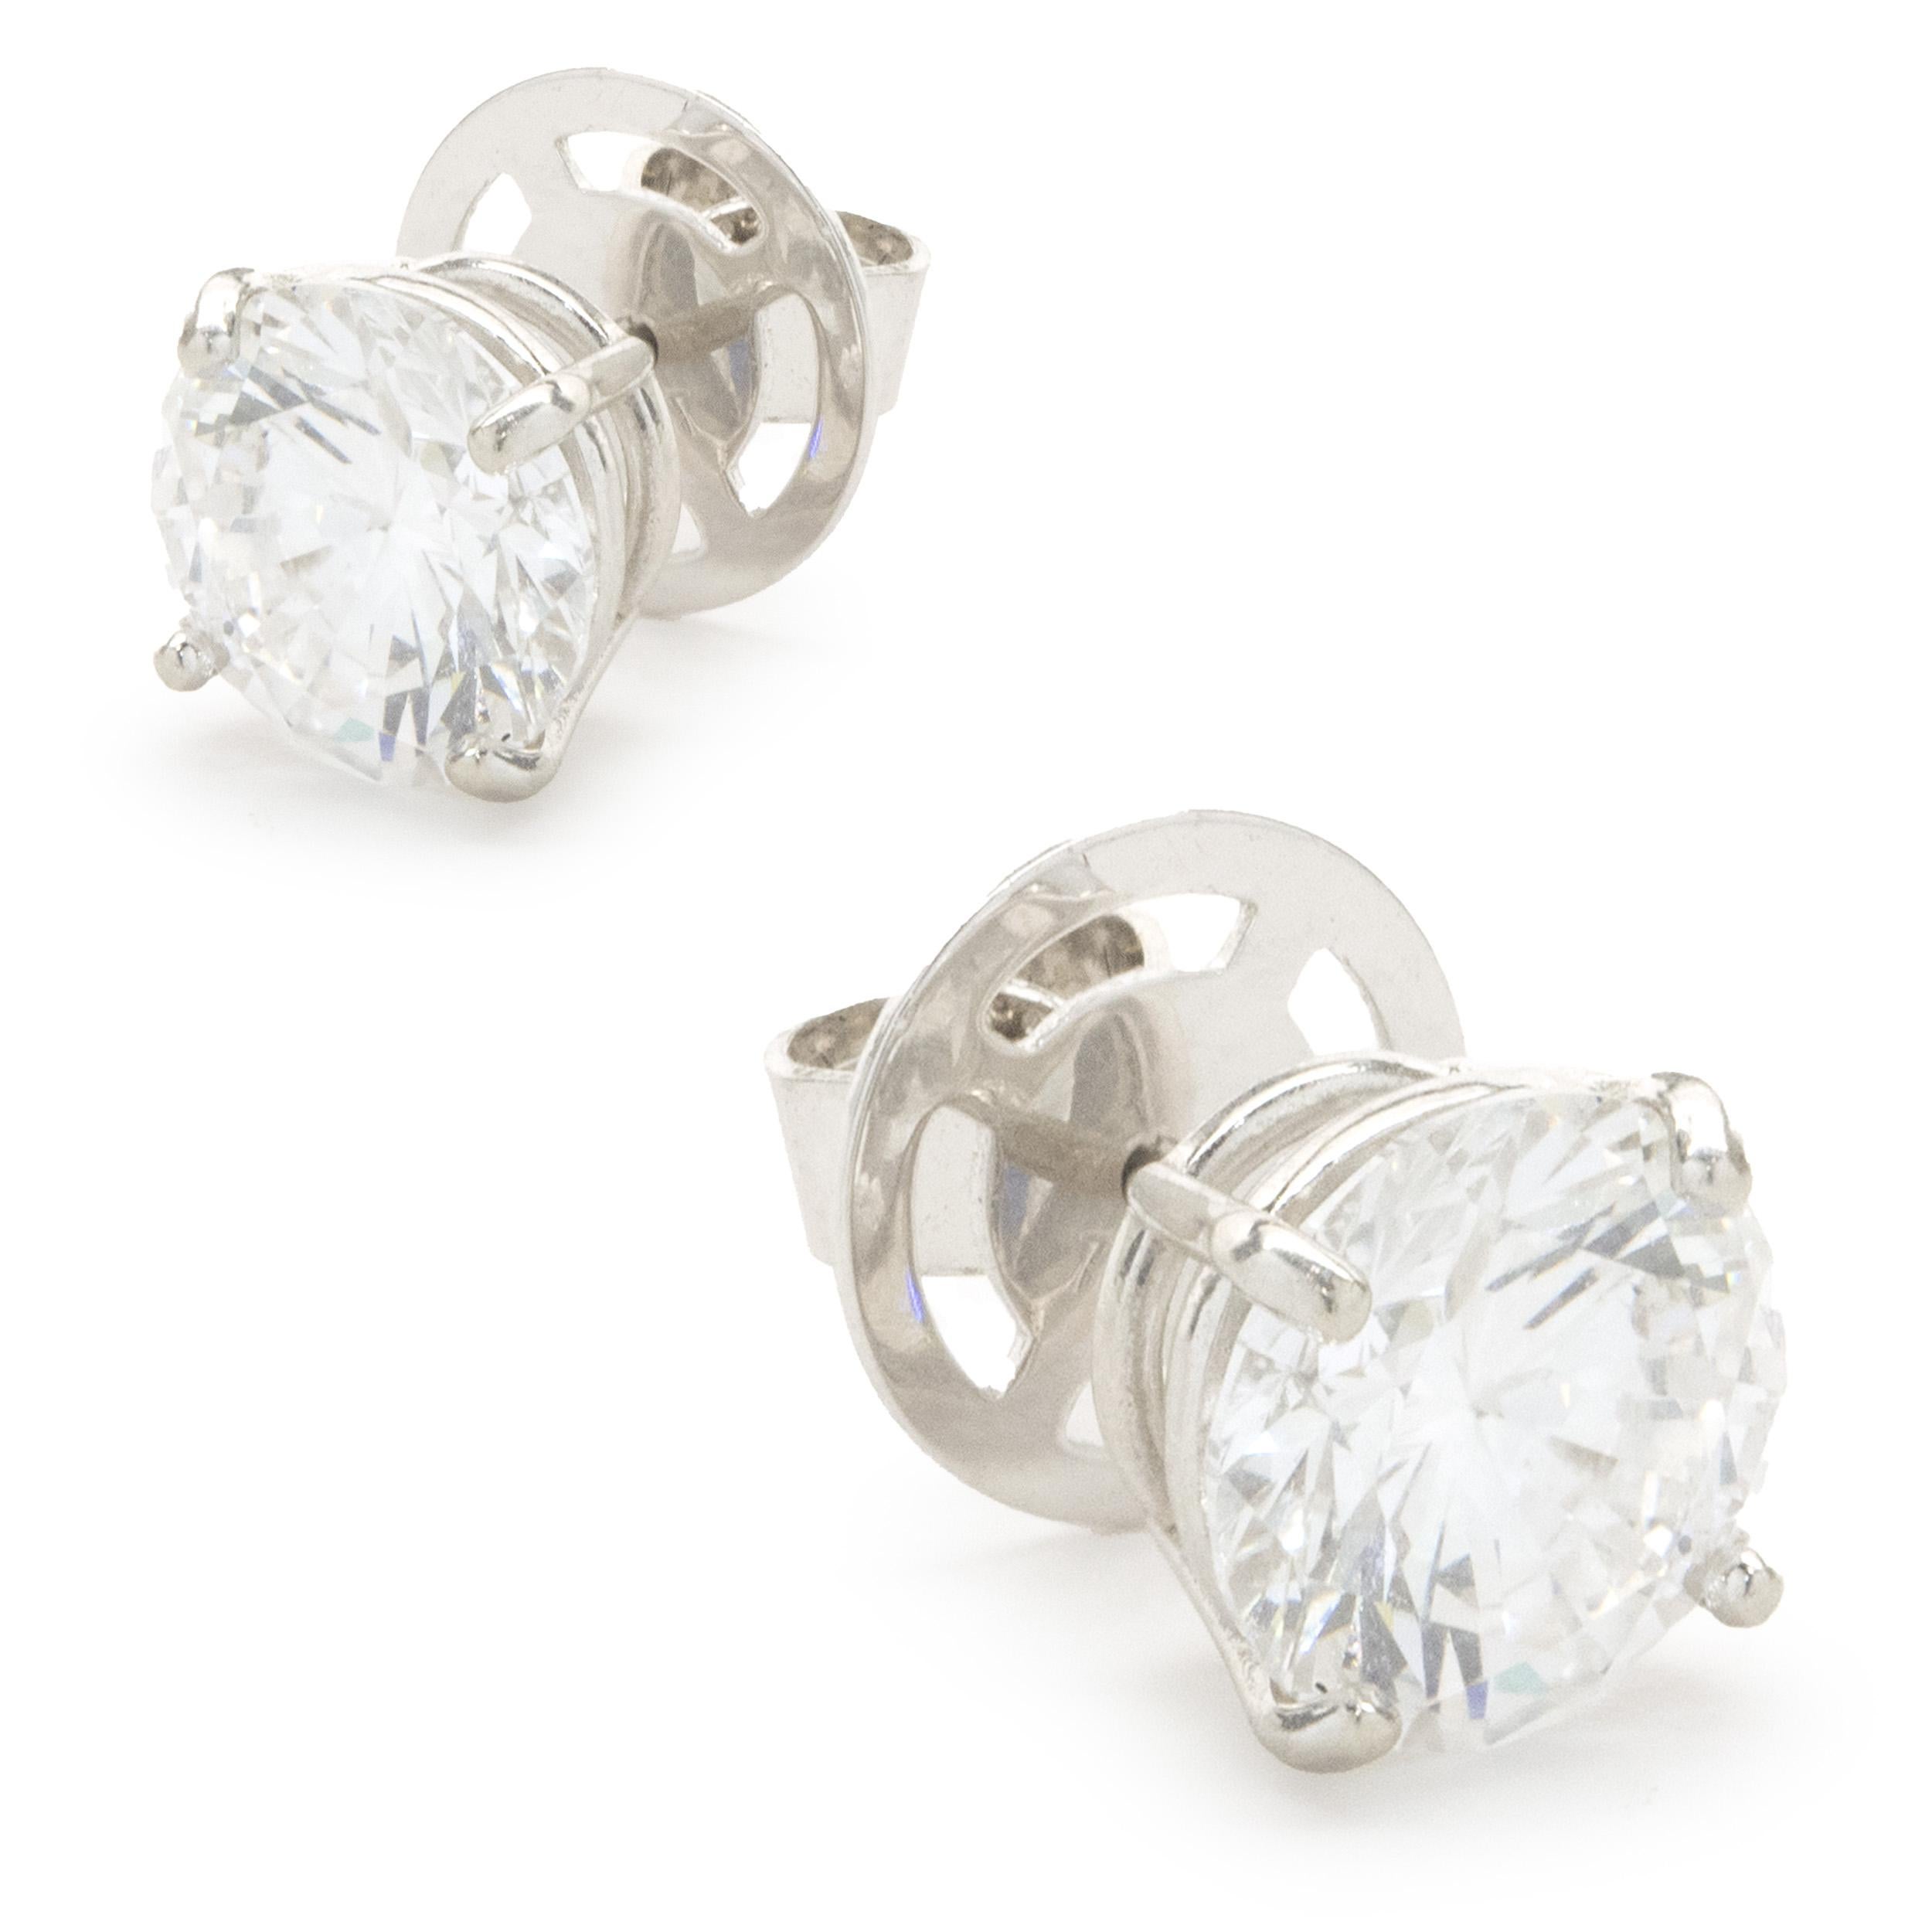 Material: 14k white gold
Diamonds: 1 round brilliant cut = 2.03ct
Color: D
Clarity: SI2
GIA: 2185095189
Diamonds: 1 round brilliant cut = 2.03ct
Color: D
Clarity: SI2
GIA: 2198105749
Dimensions: earrings measure approximately 8.40mm in